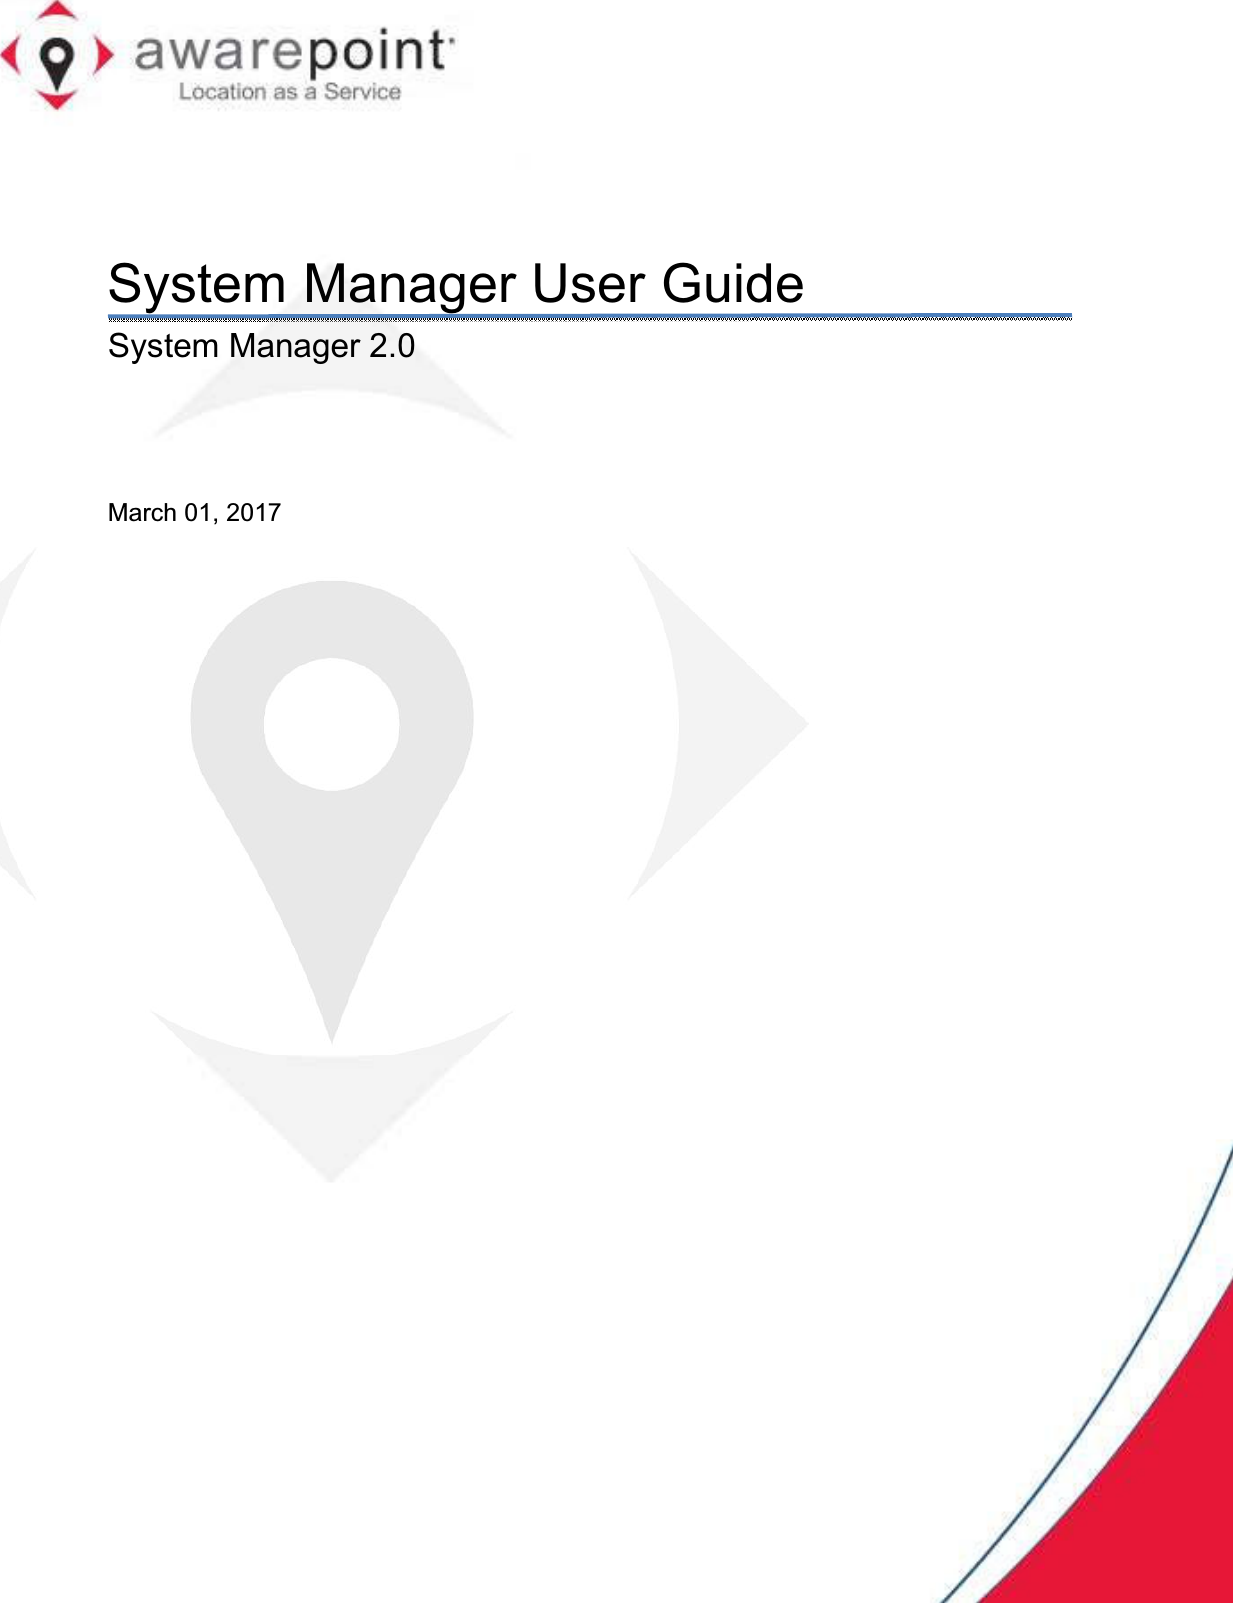  System Manager User Guide System Manager 2.0  March 01, 2017        